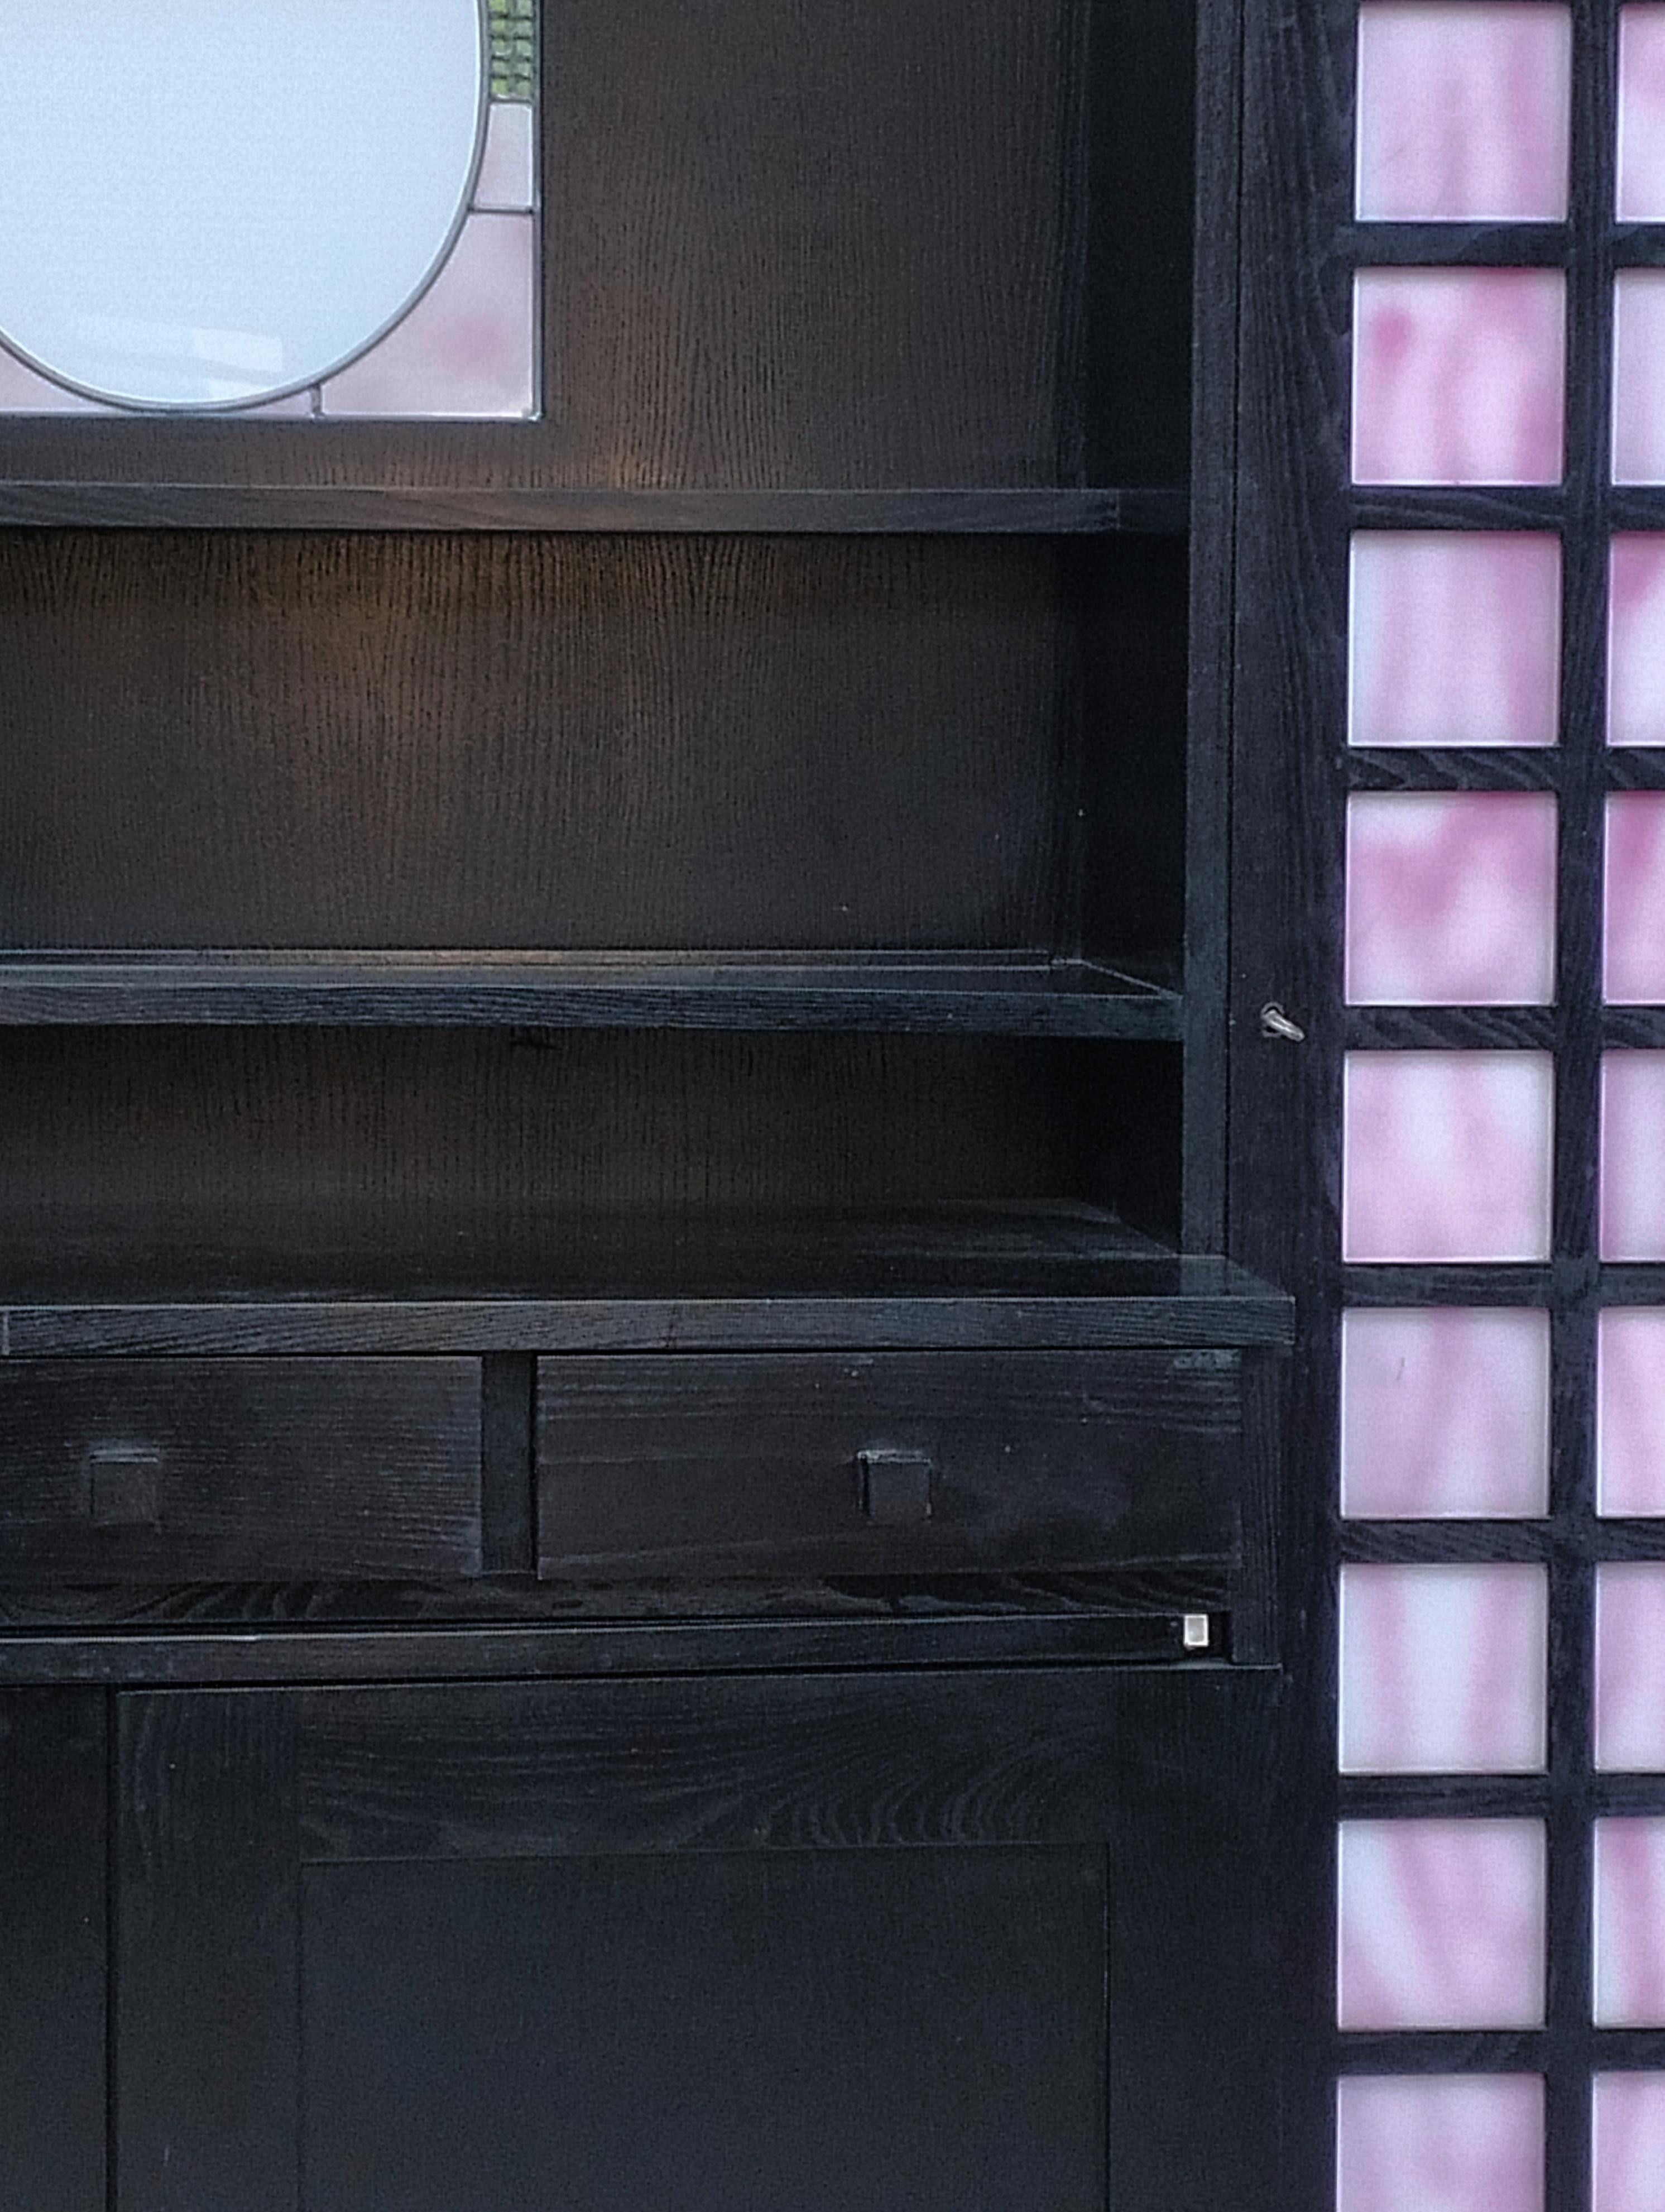 Mid-20th Century Cabinet  by Charles Rennie Mackintosh for Cassina 60s